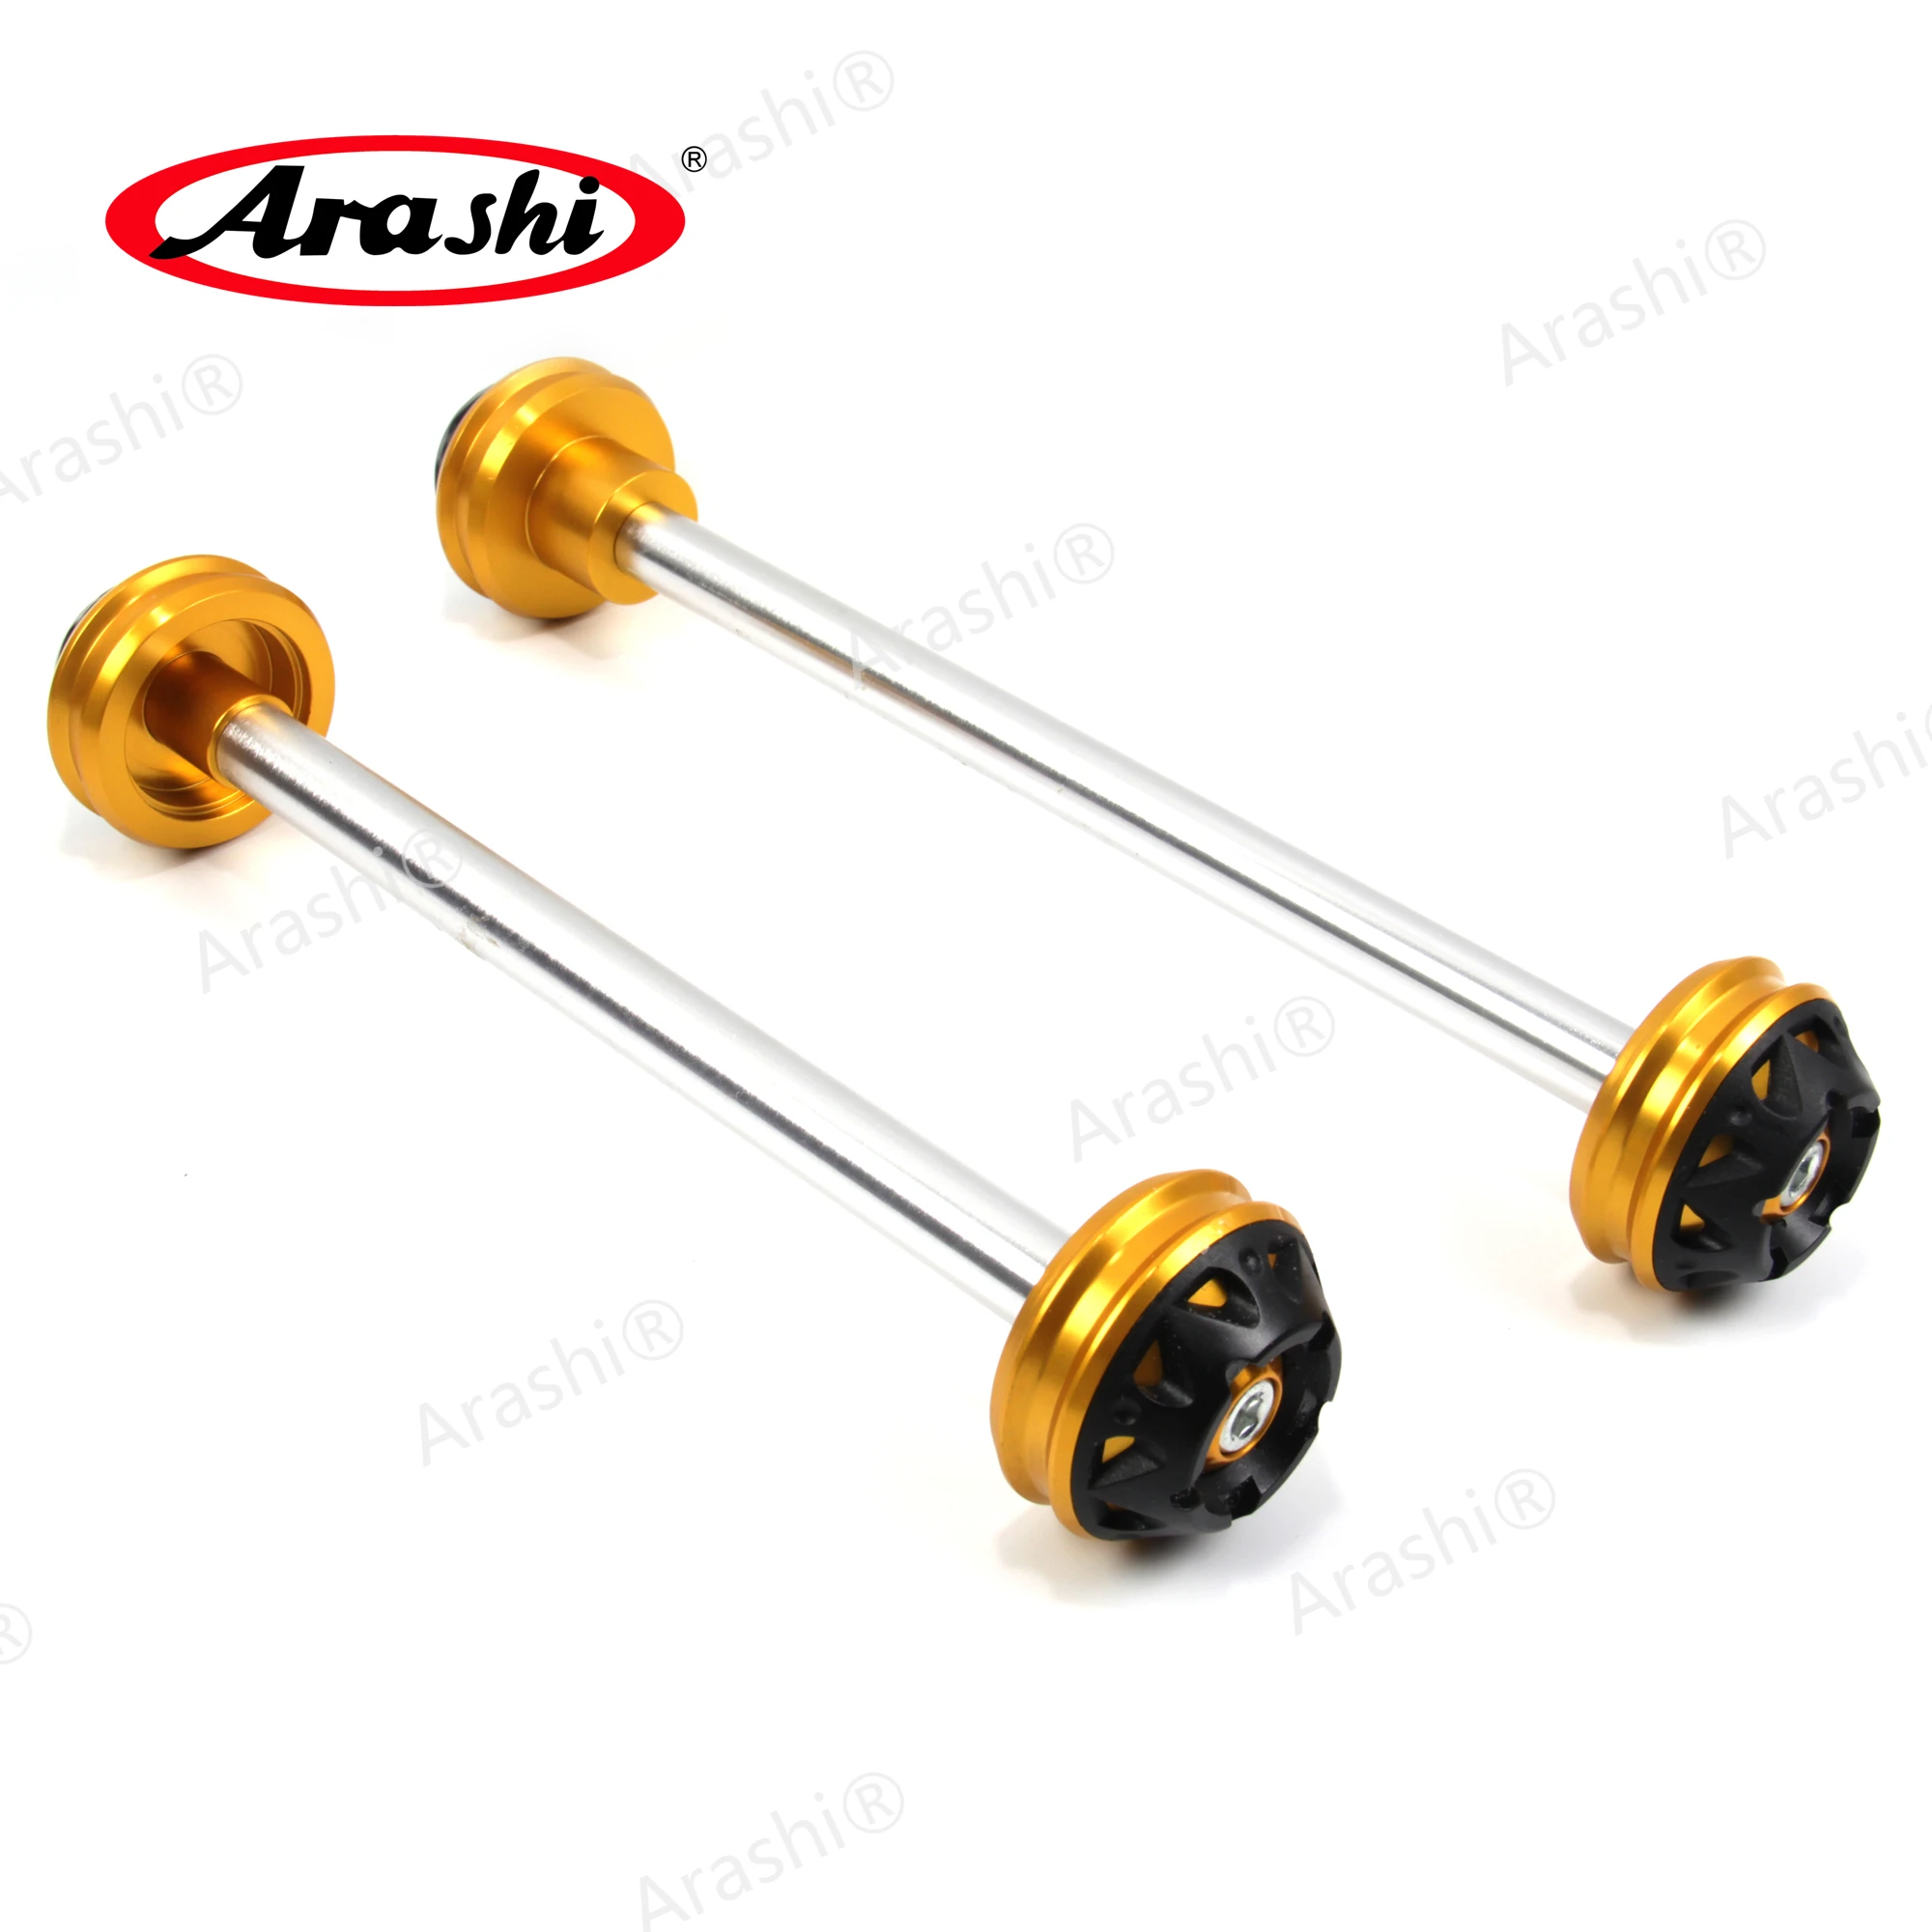 Arashi Motorcycle Axle Fork Wheel Protector Slider For DUCATI 1098 2008 2009 2010 2011 2012 2013 2014 2015 Falling Protection